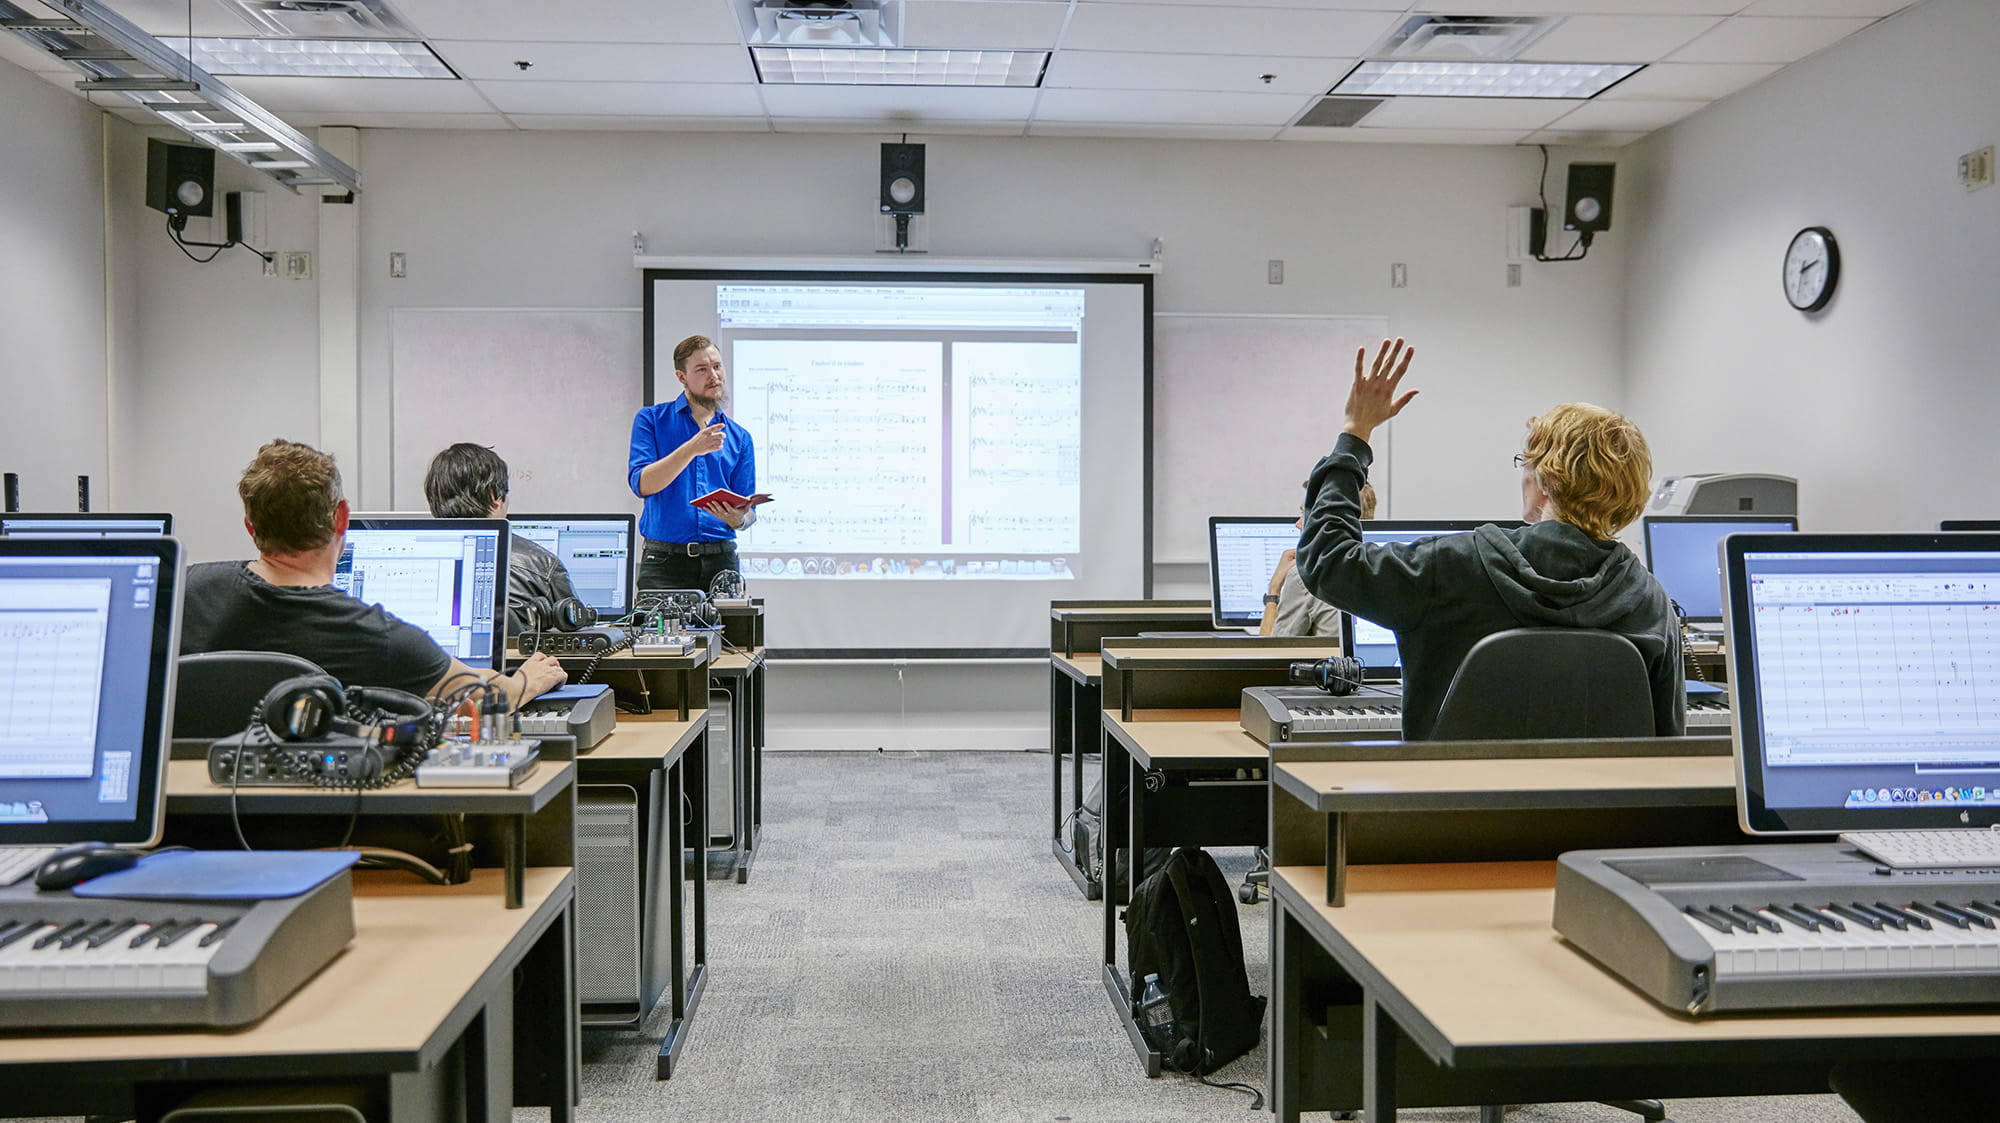 An instructor talking to students who are at computers with music keyboards